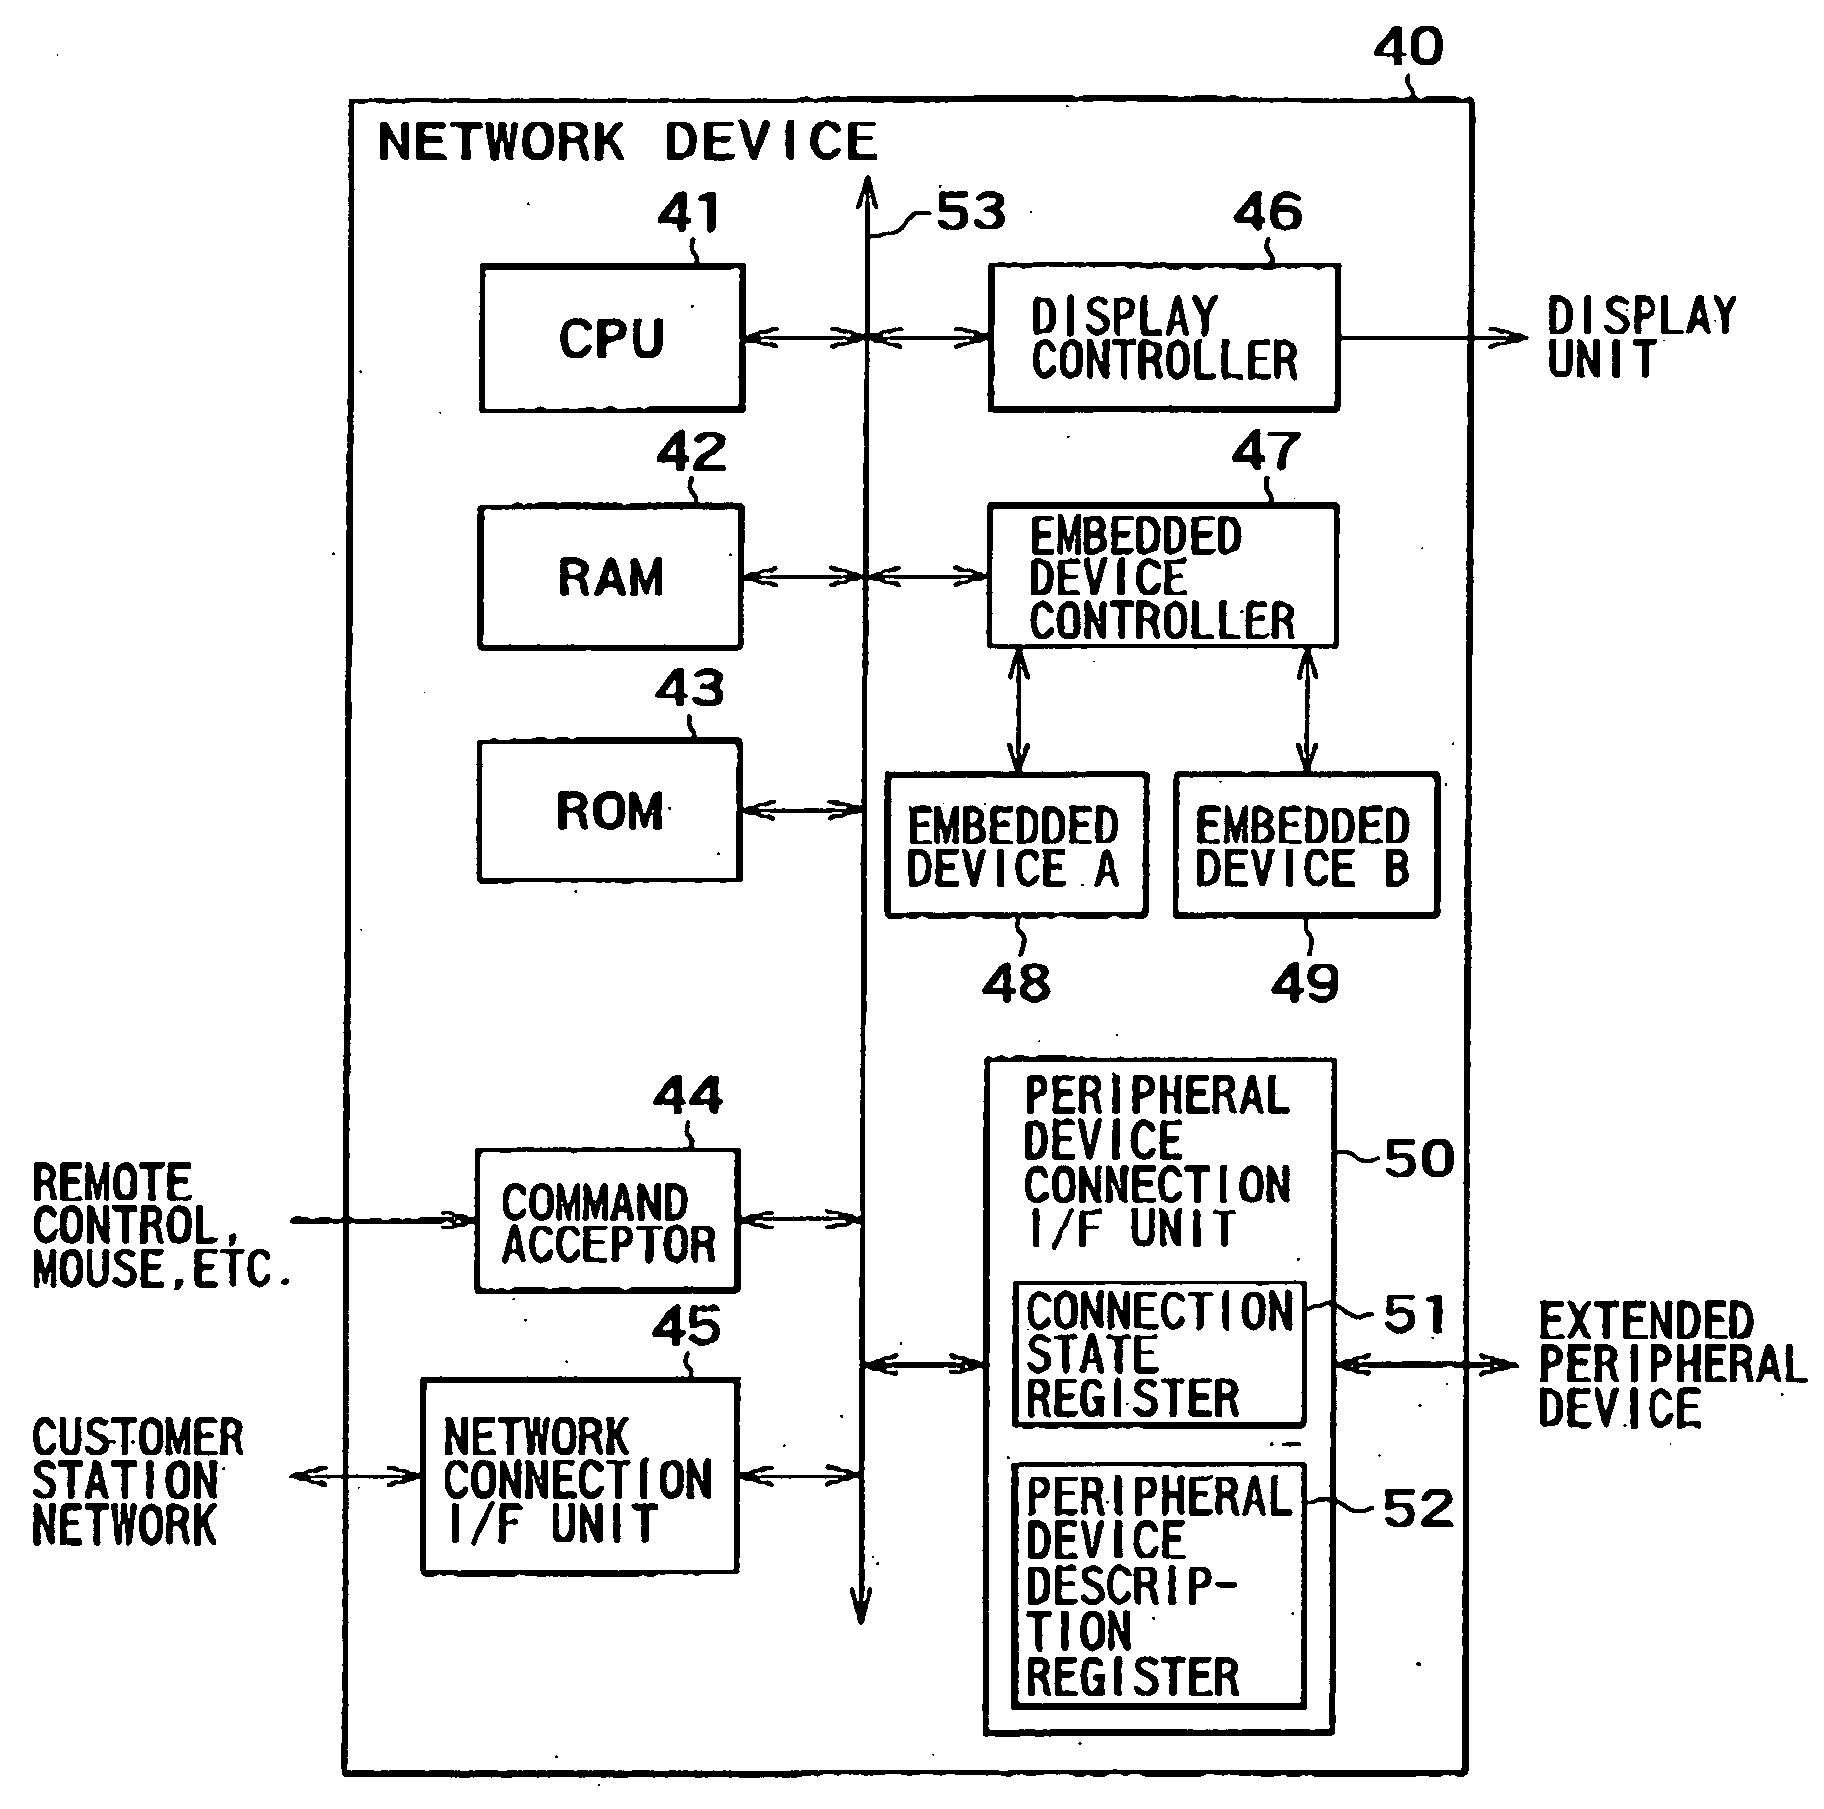 Network device